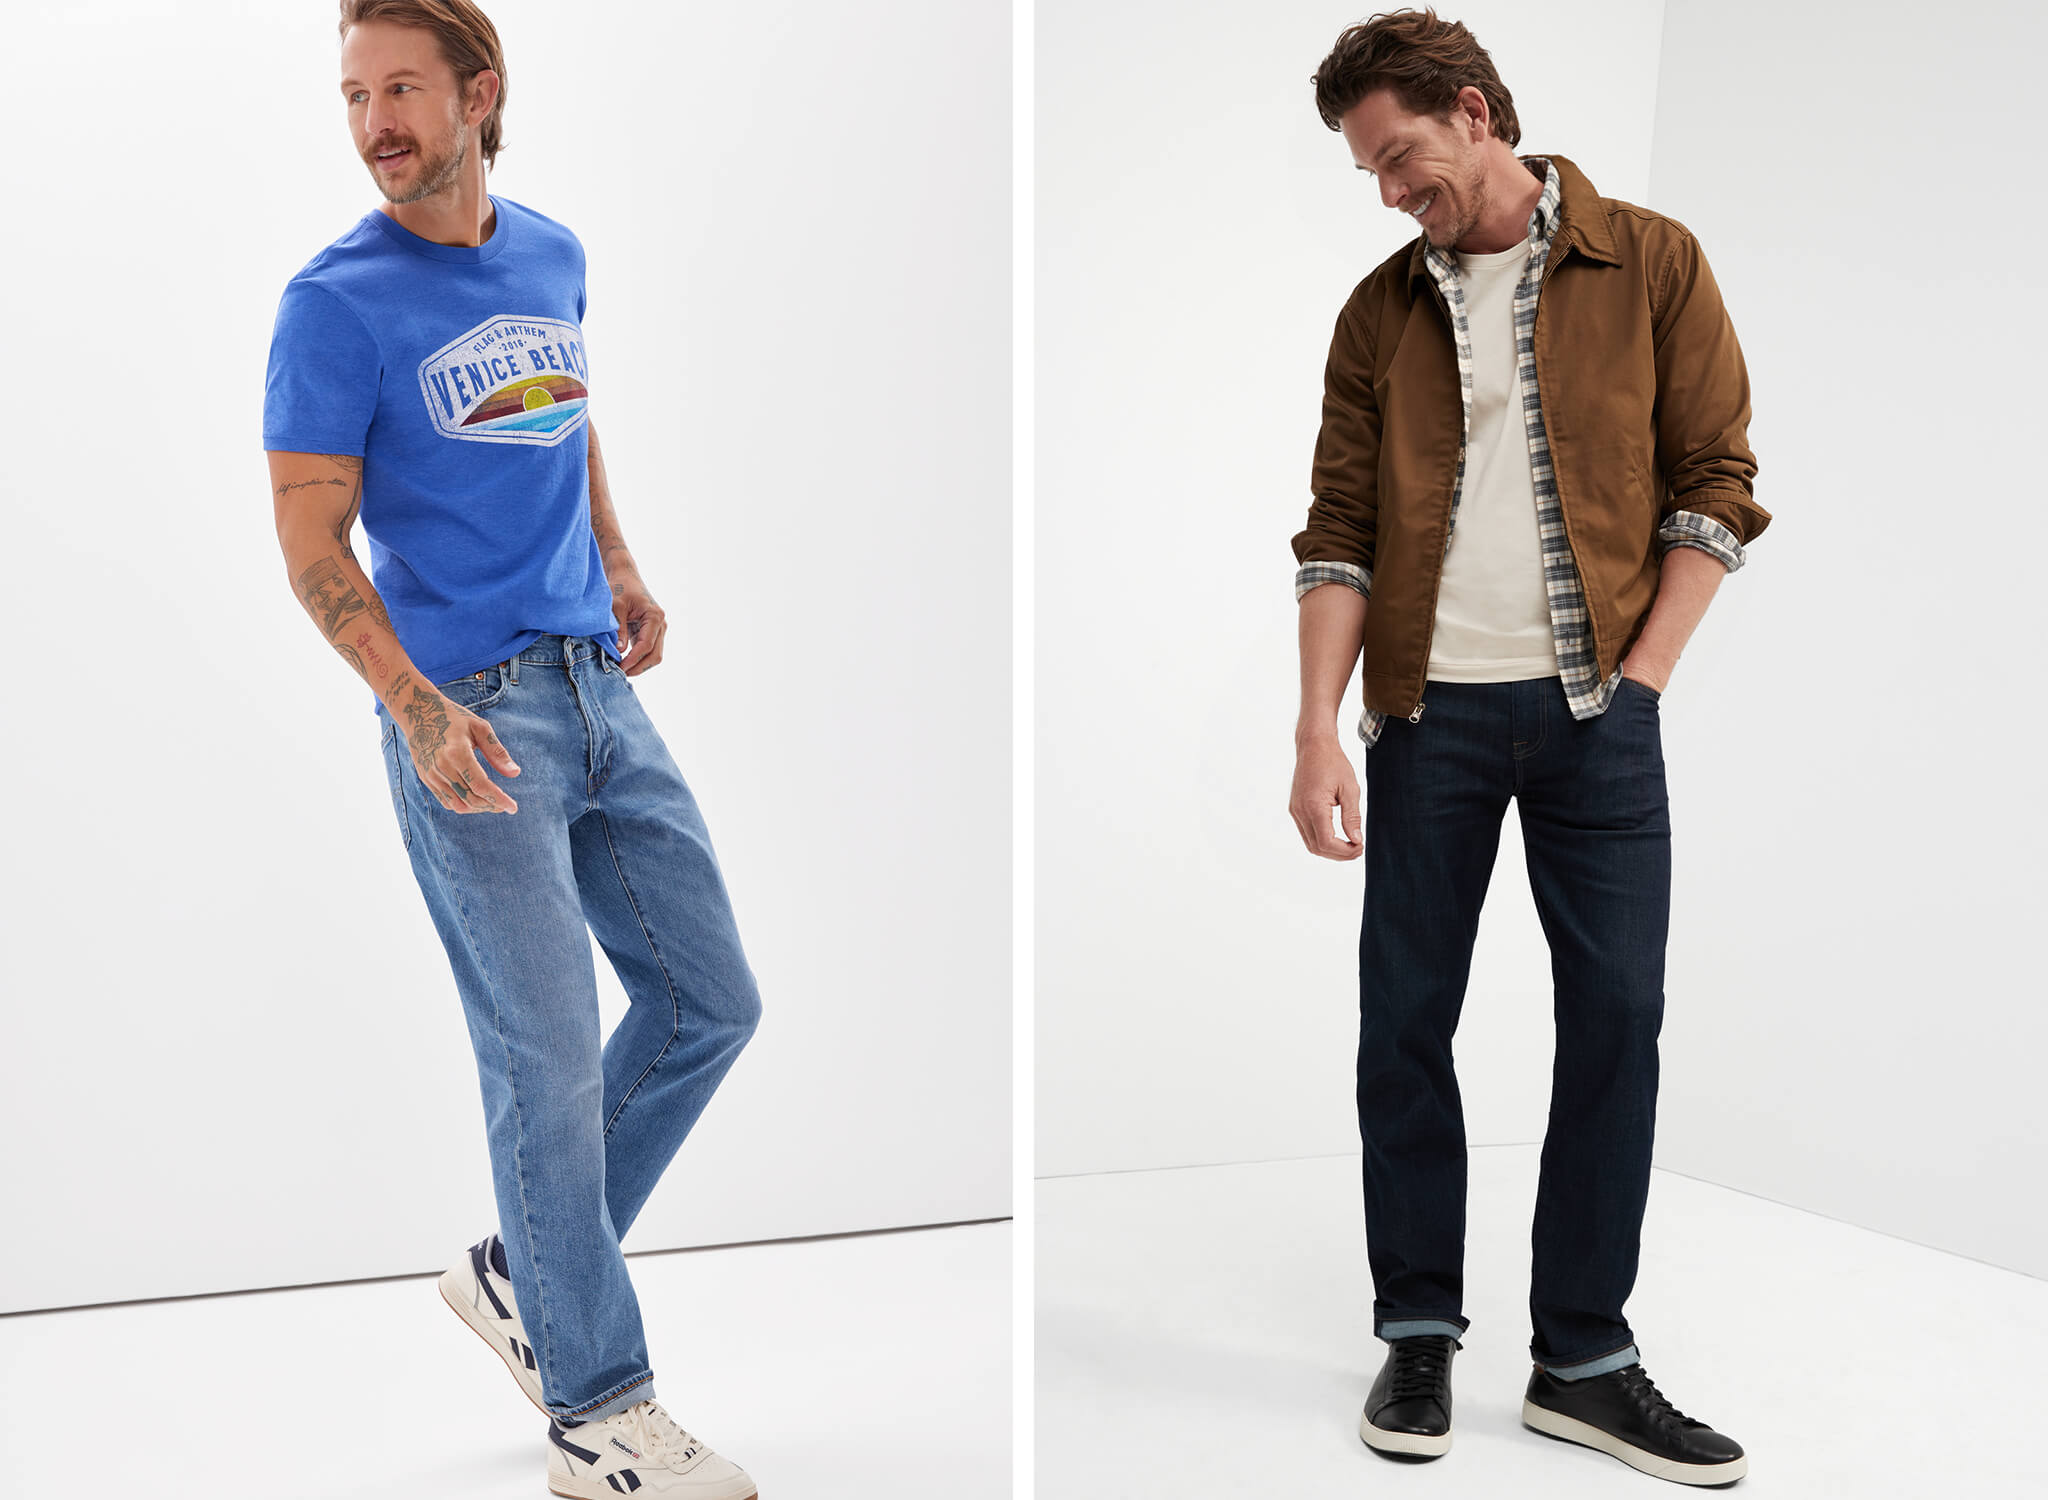 men's denim outfits featuring t-shirt sneakers and jeans, men's demin outfit with plaid shirt and jacket